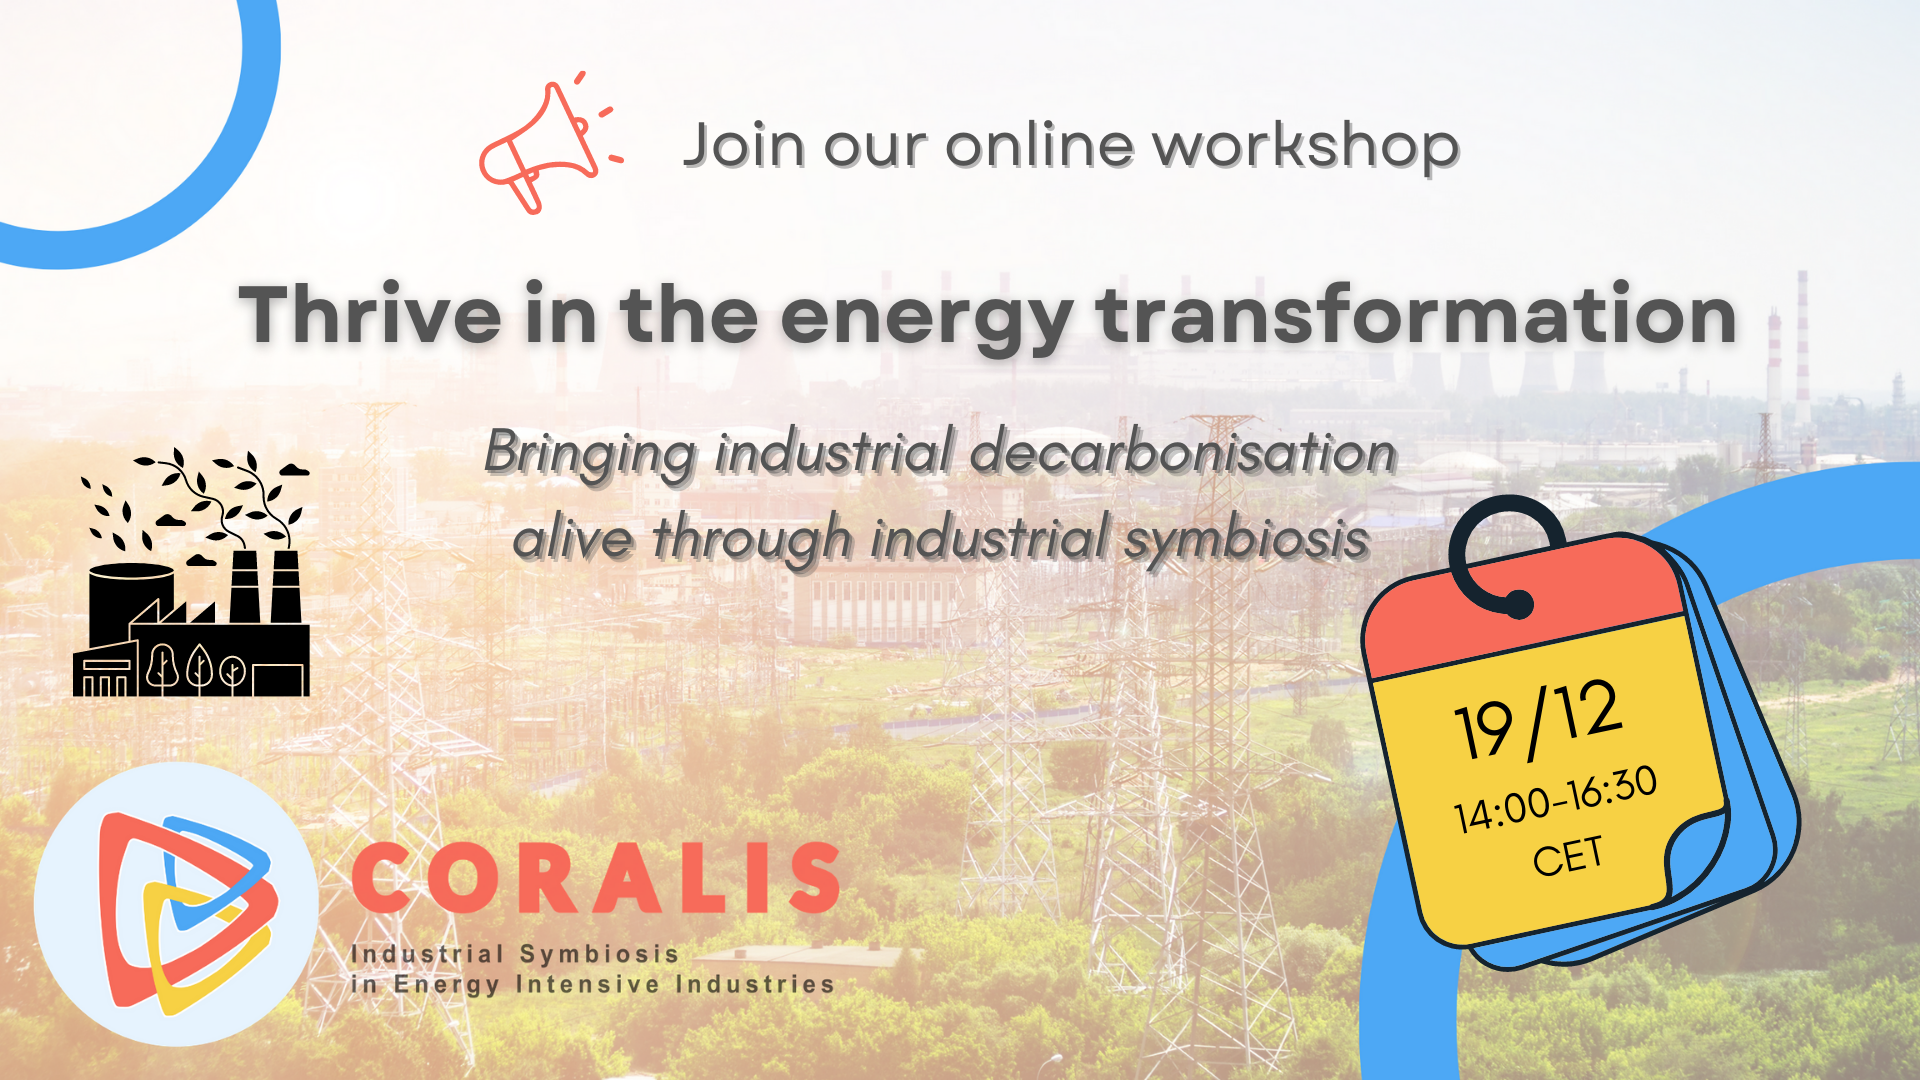 Join the online CORALIS workshop on industrial decarbonization (19.12.2022)